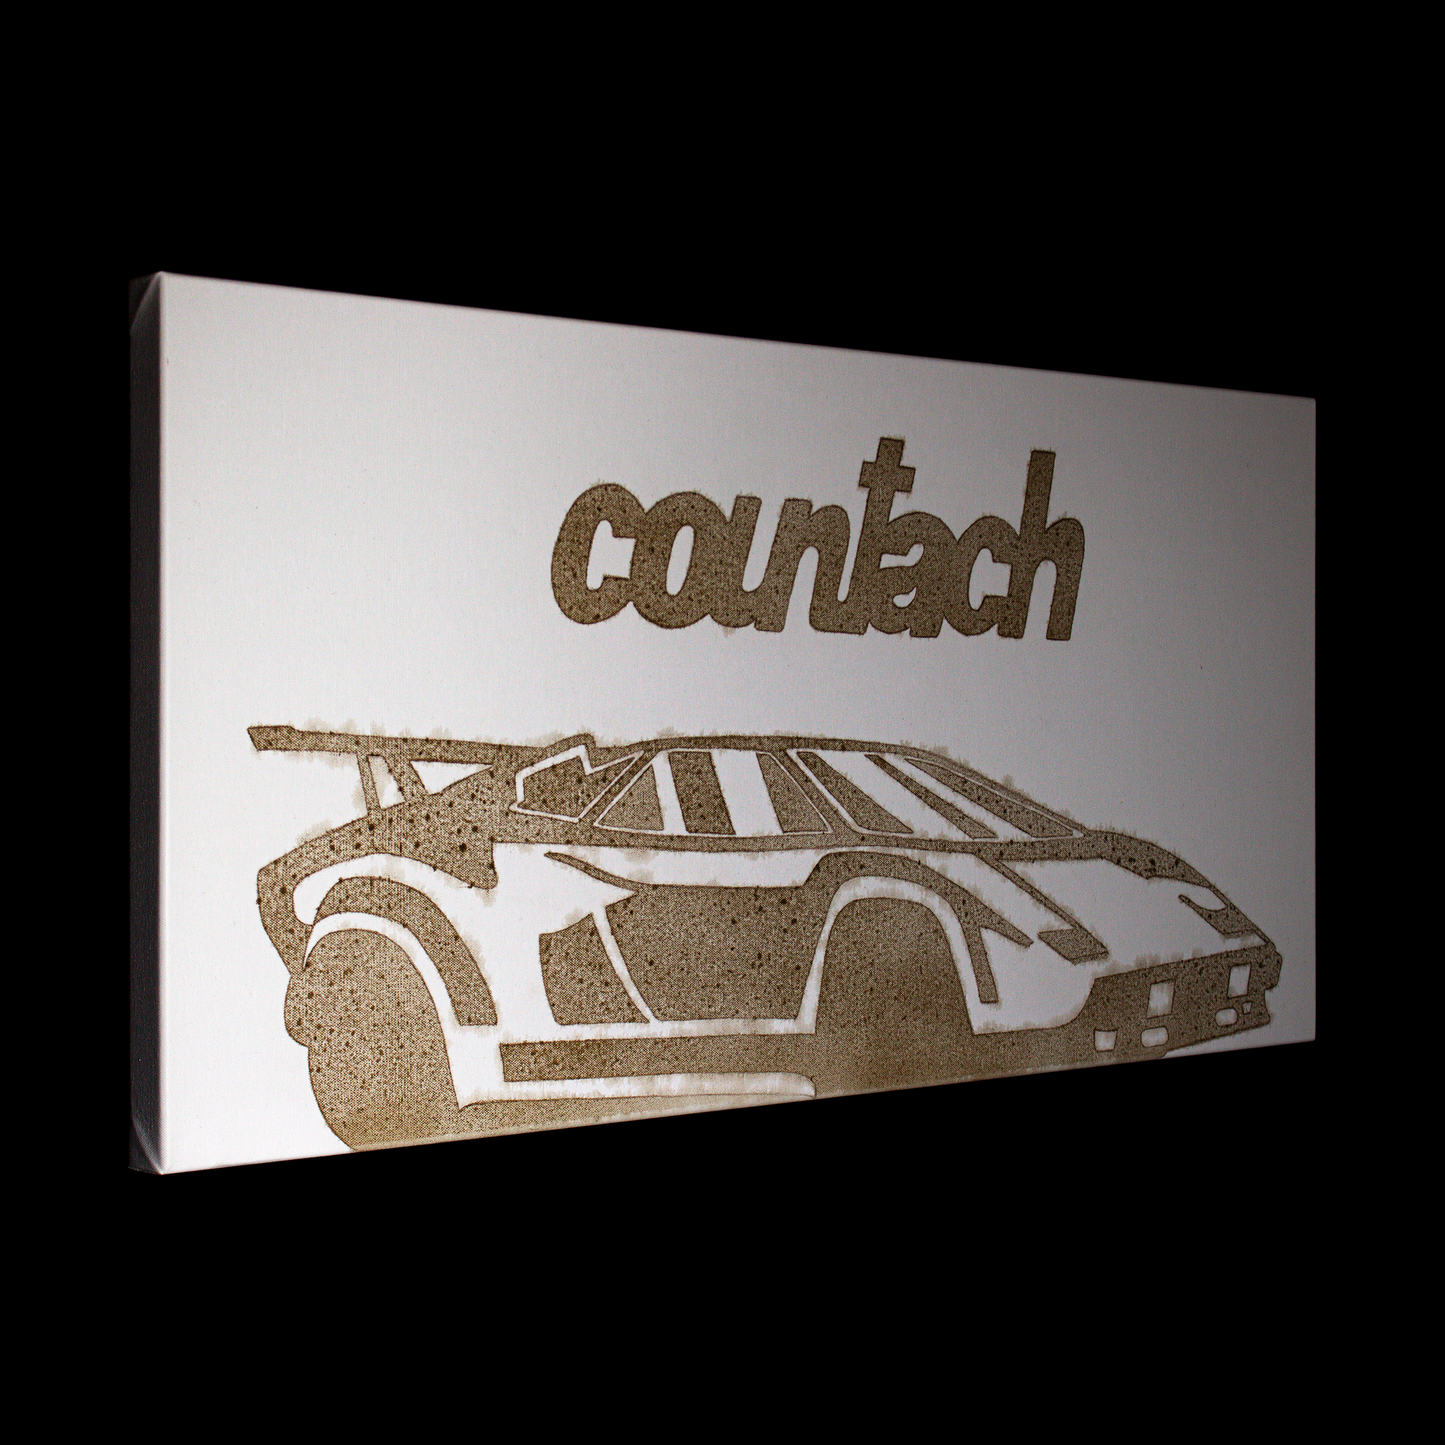 Engine Oil Painting - "Countach"